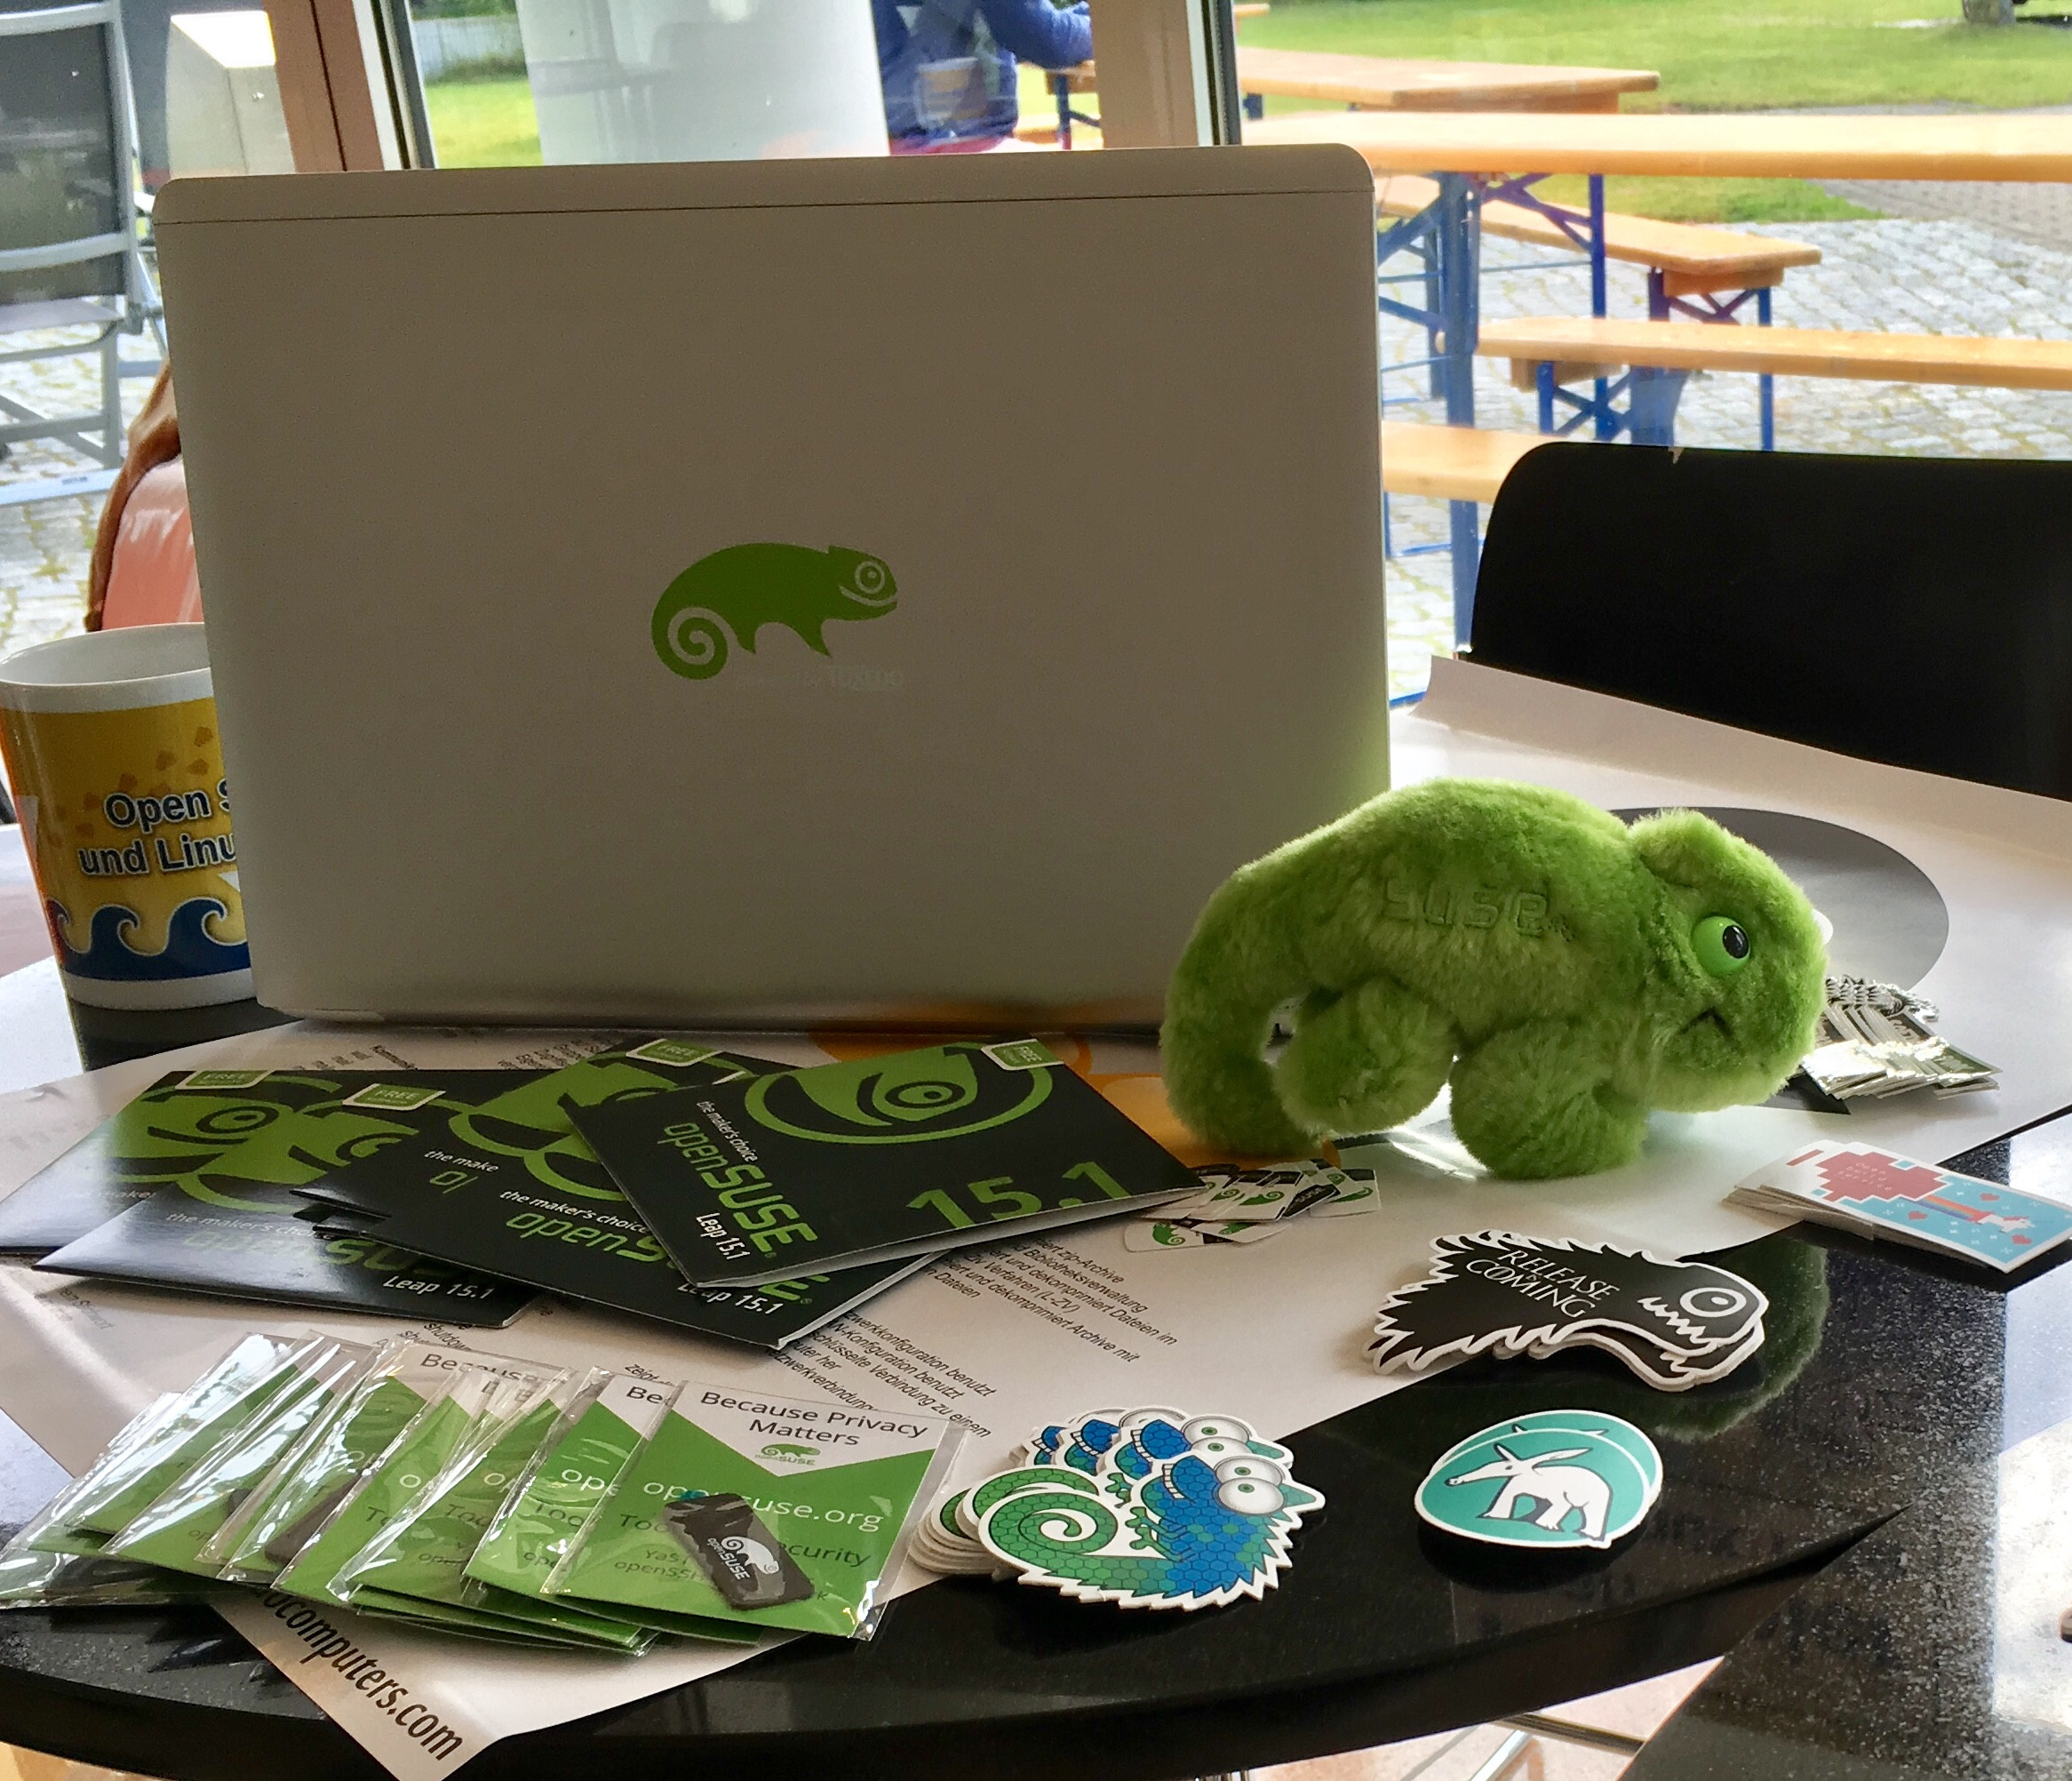 openSUSE-Stand (Foto: Christian Imhorst, CC-0)